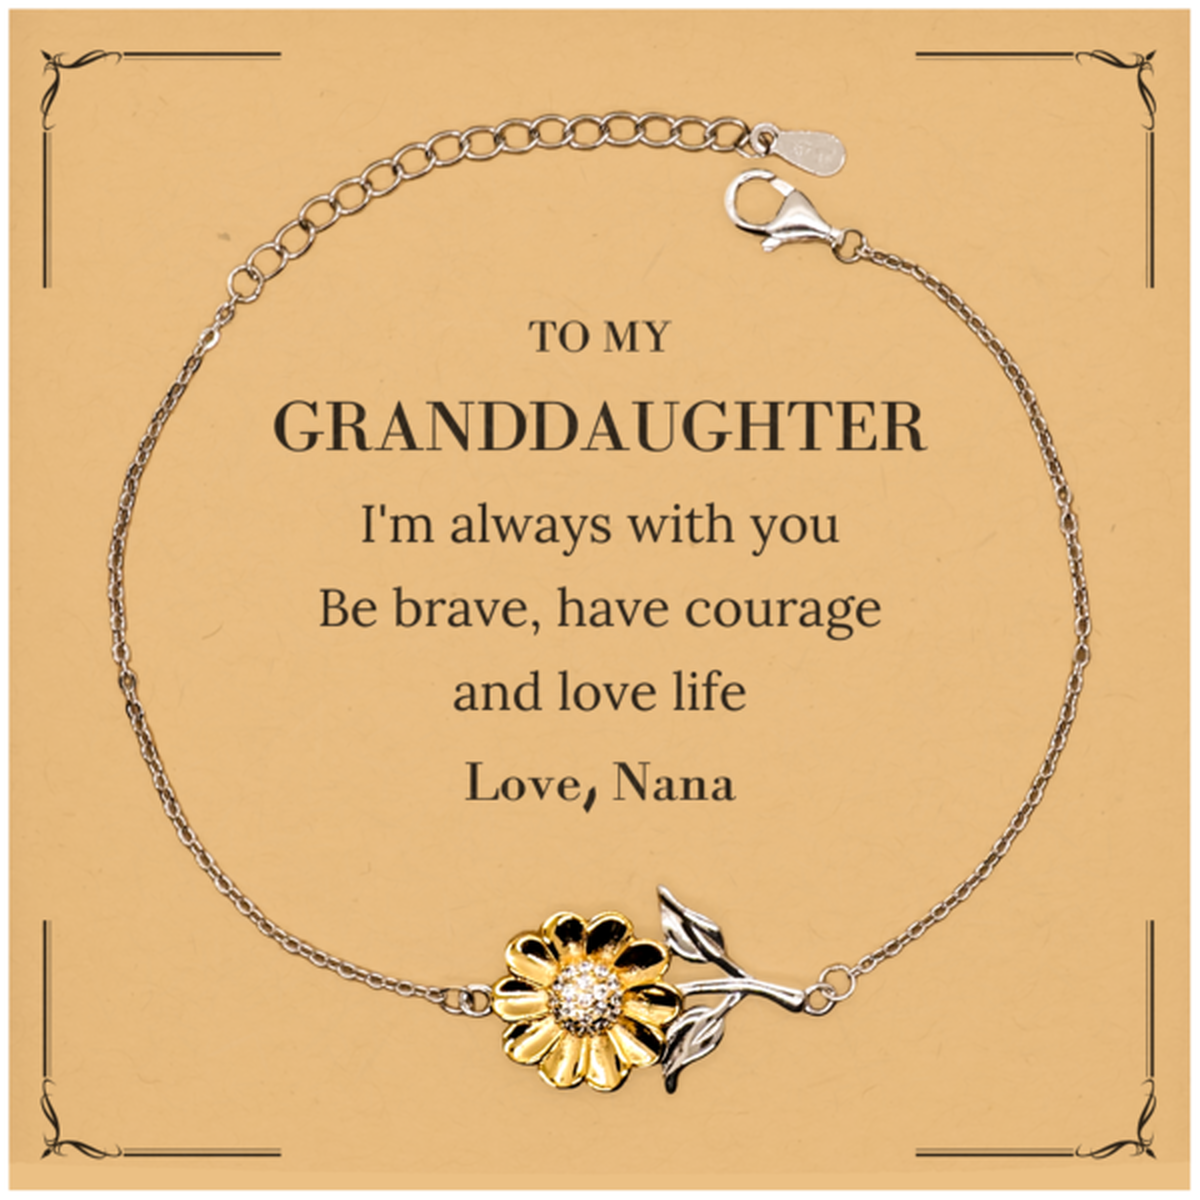 To My Granddaughter Gifts from Nana, Unique Sunflower Bracelet Inspirational Christmas Birthday Graduation Gifts for Granddaughter I'm always with you. Be brave, have courage and love life. Love, Nana